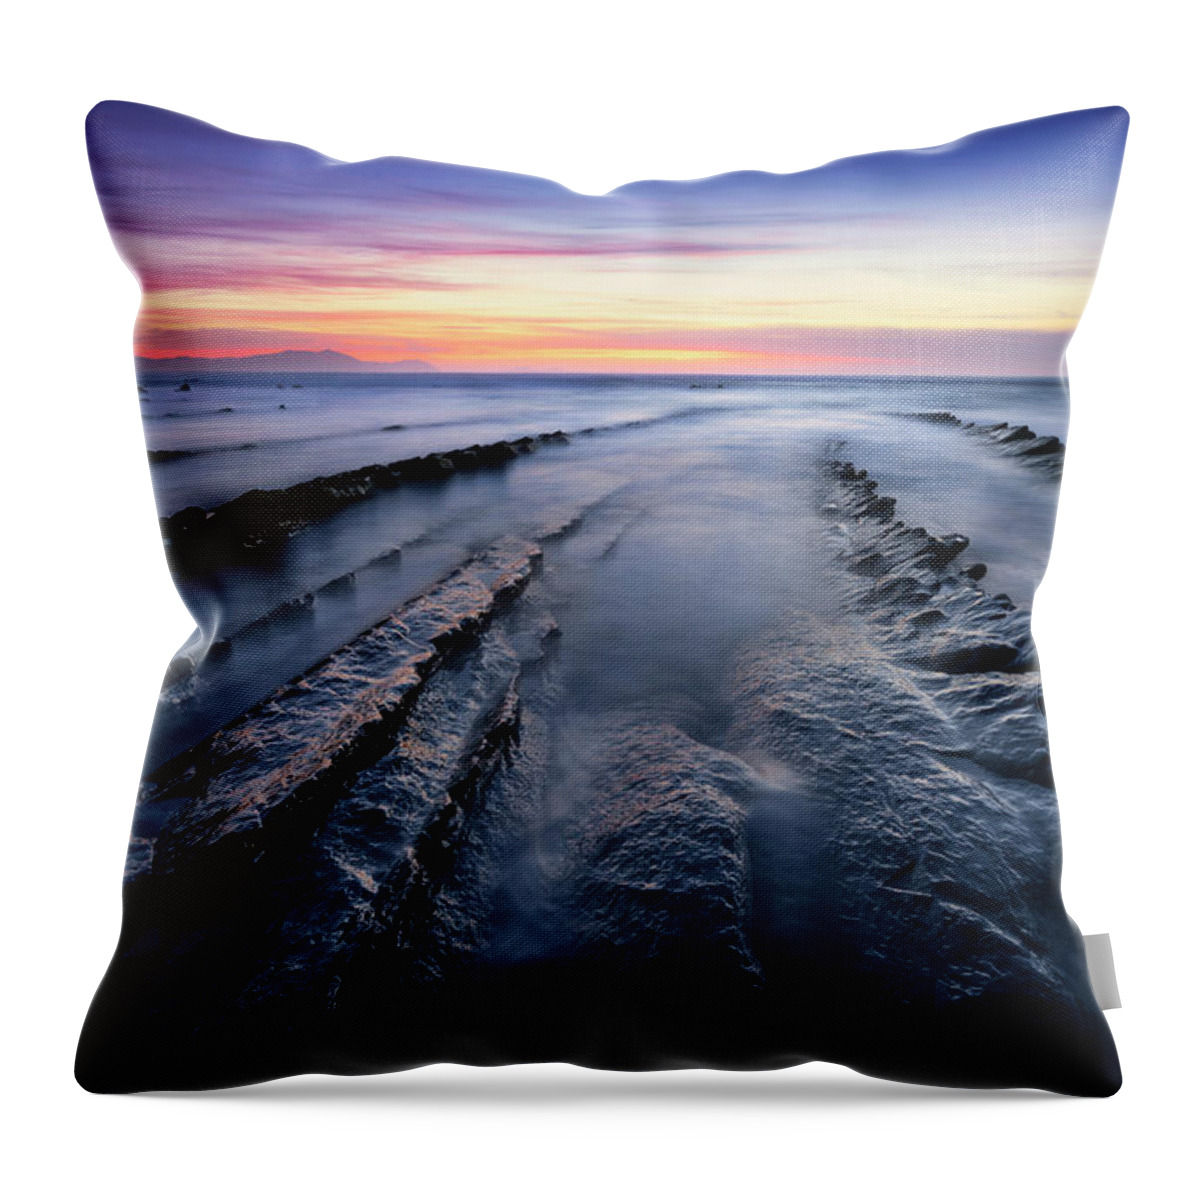 Clouds Throw Pillow featuring the photograph The Blue Hour by Dominique Dubied